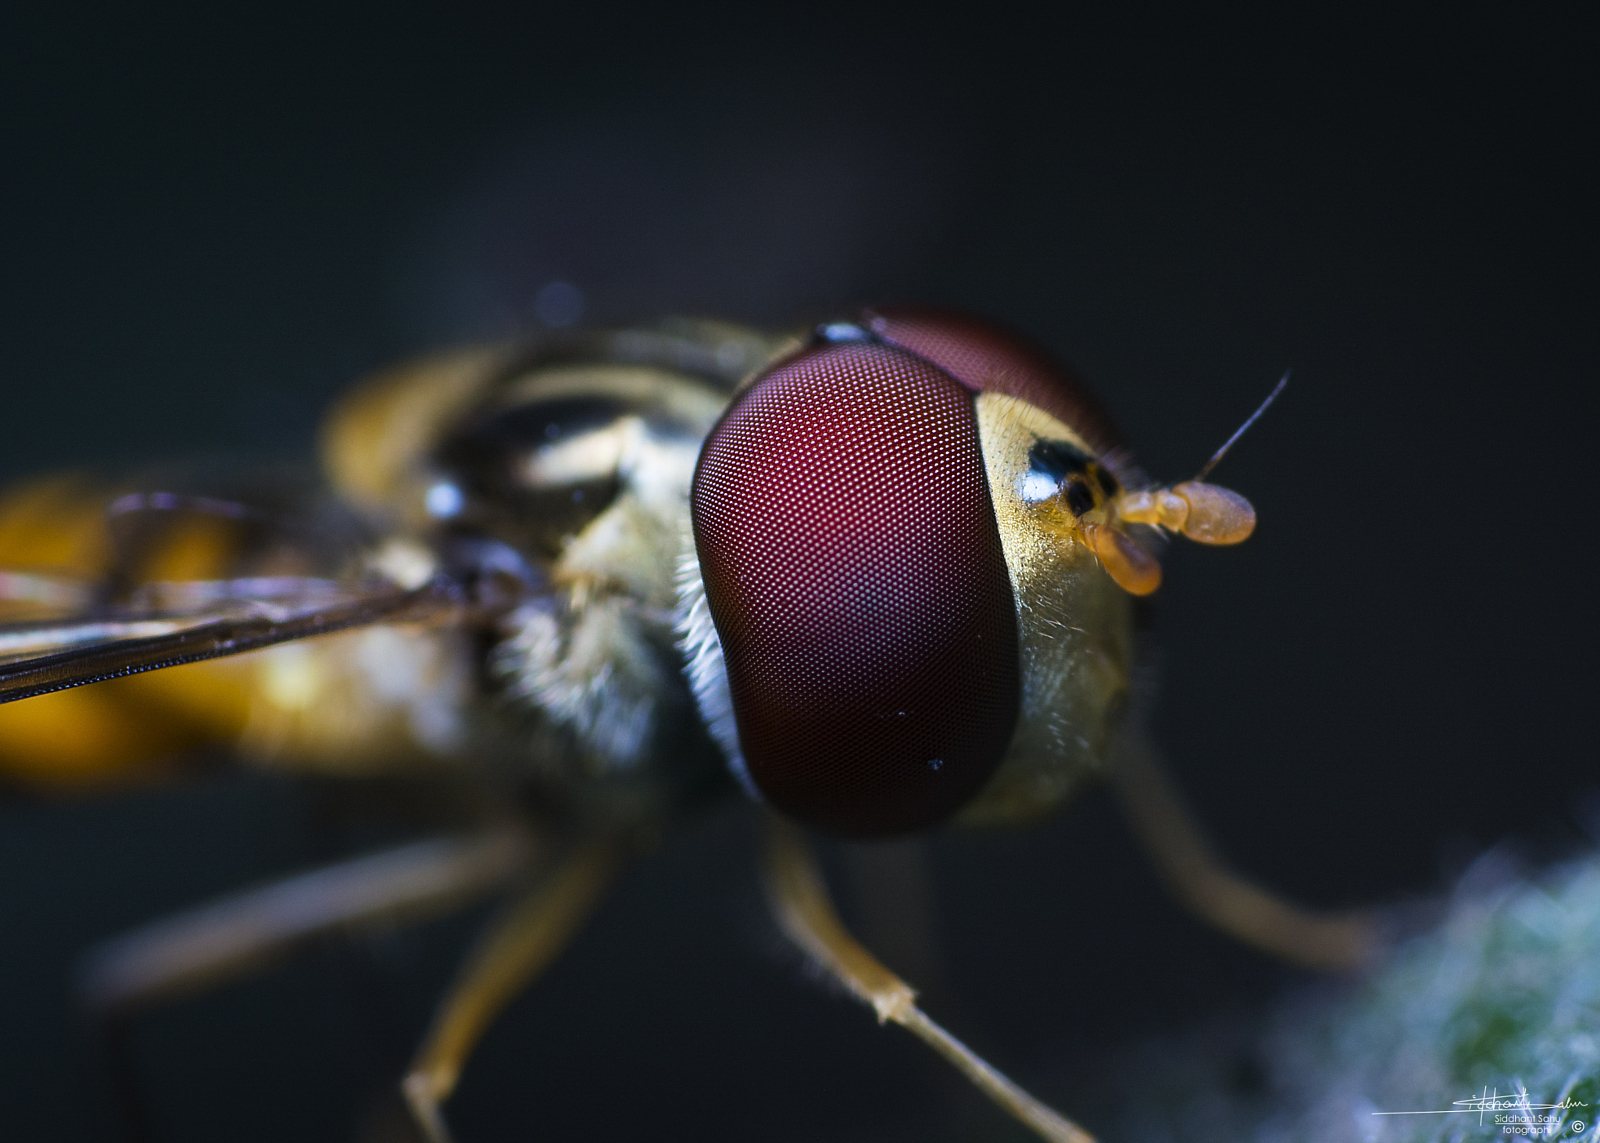 Amazing Macro Photos Shot by a 16-Year-Old in His Backyard